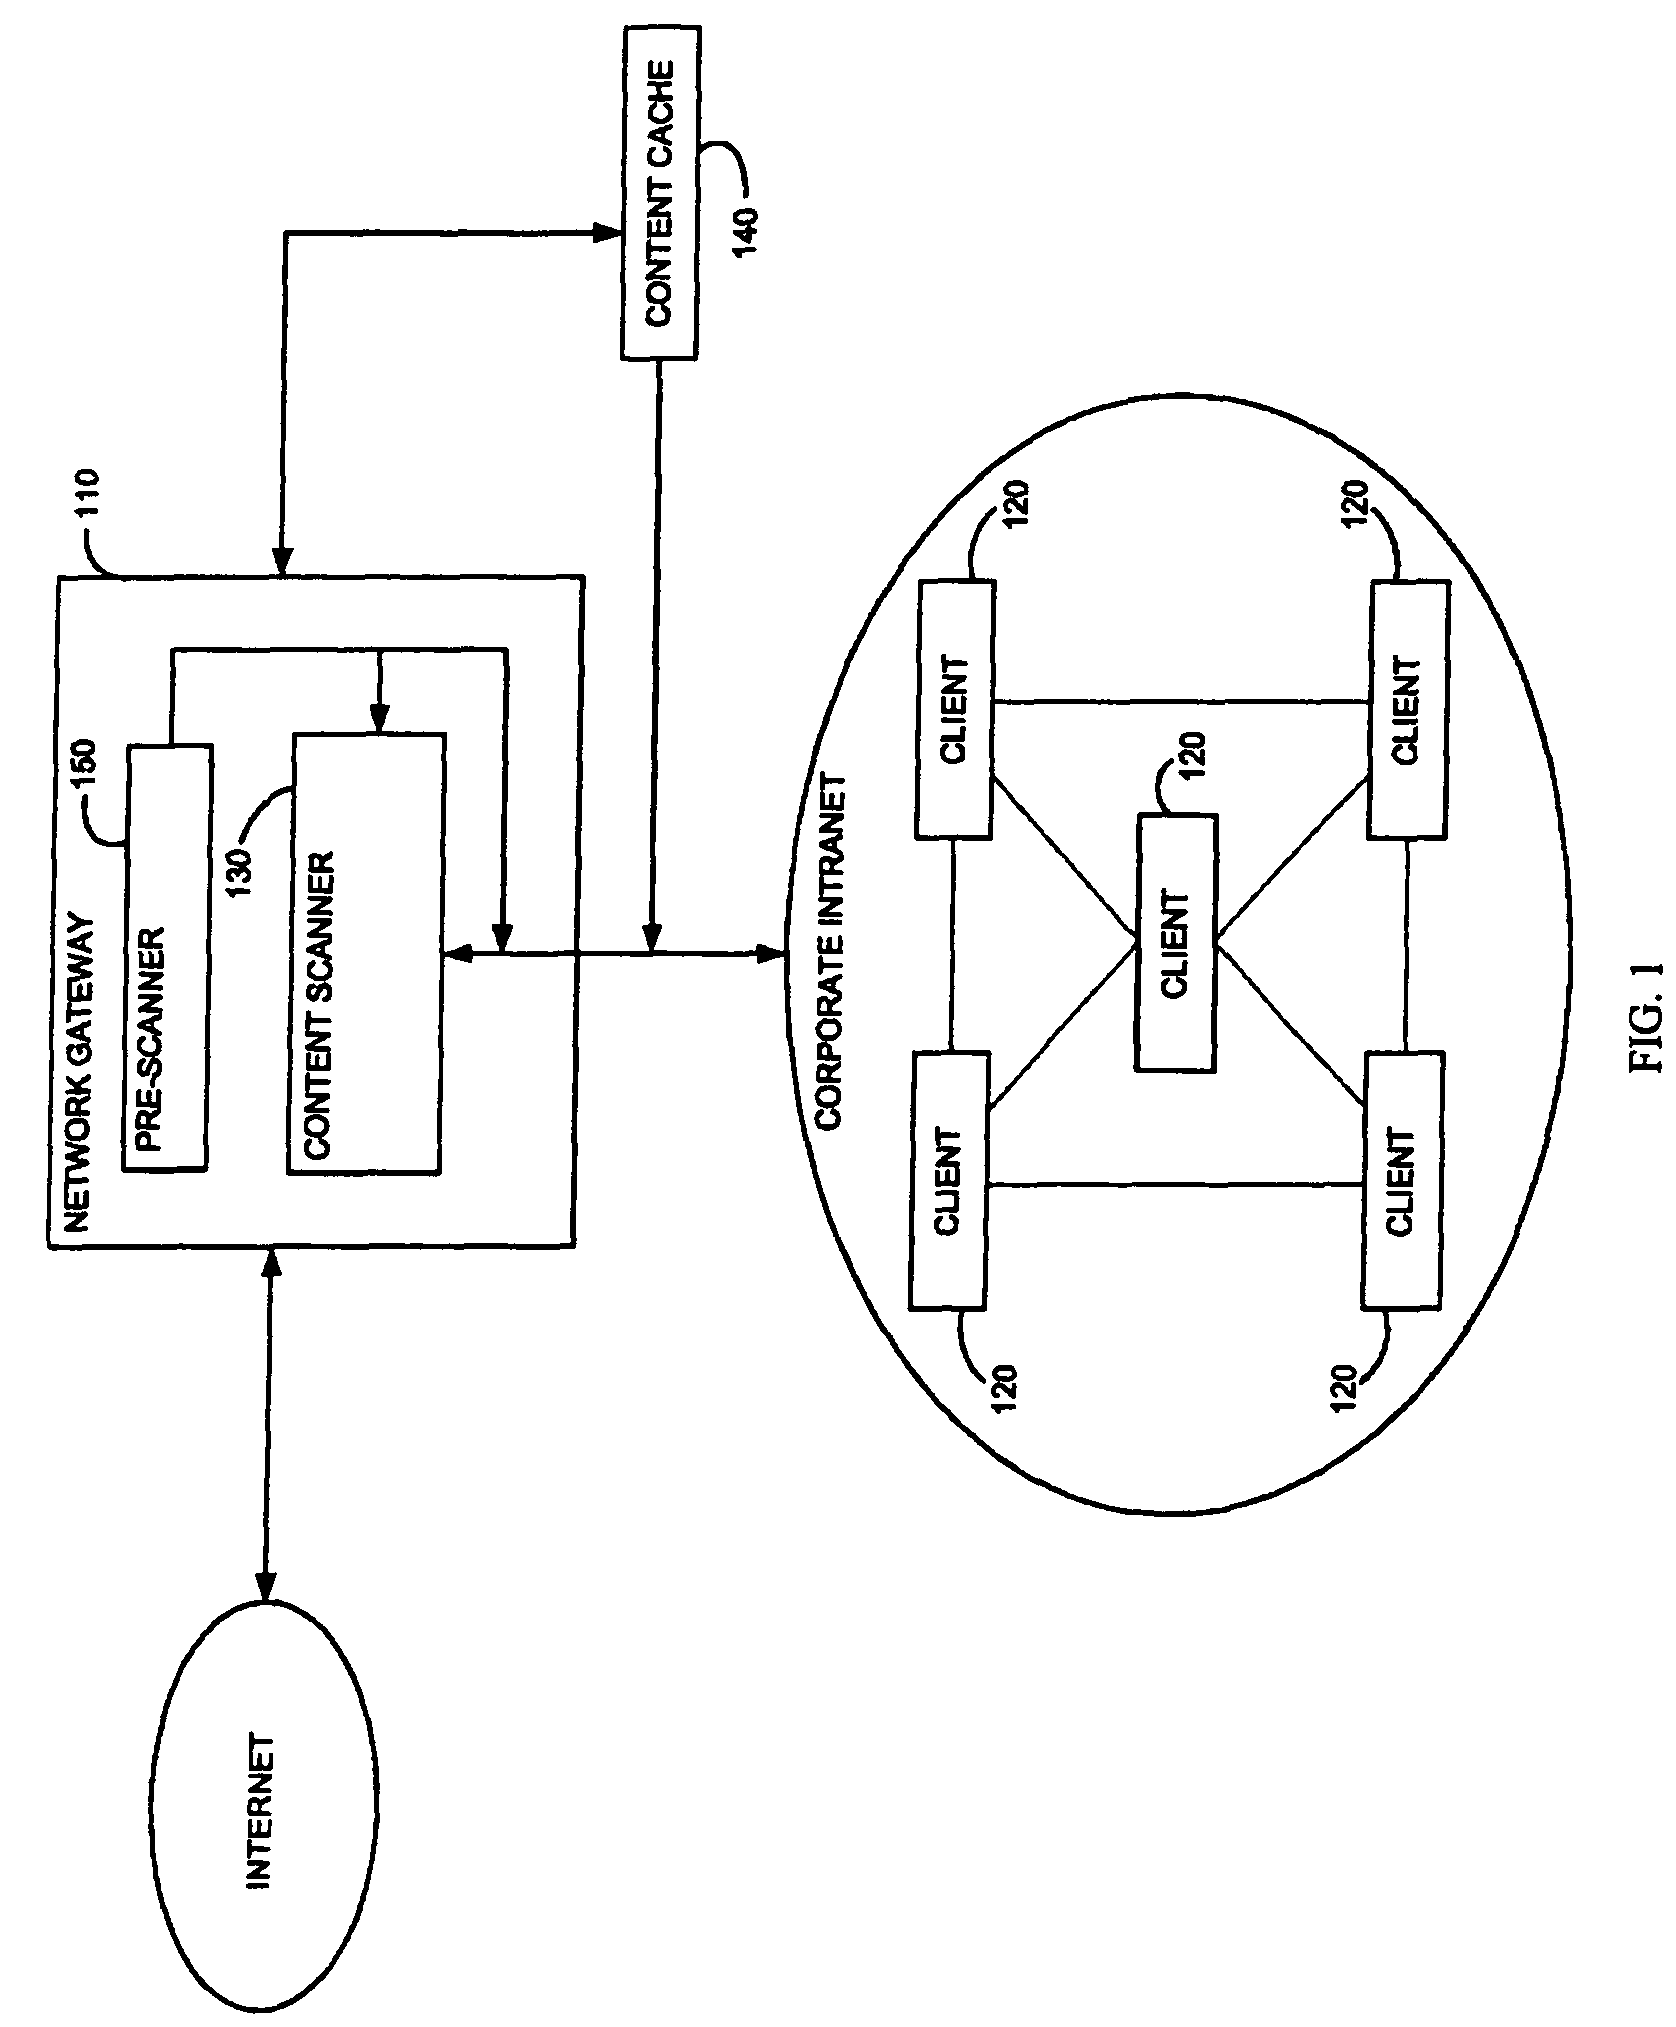 Method and system for adaptive rule-based content scanners for desktop computers